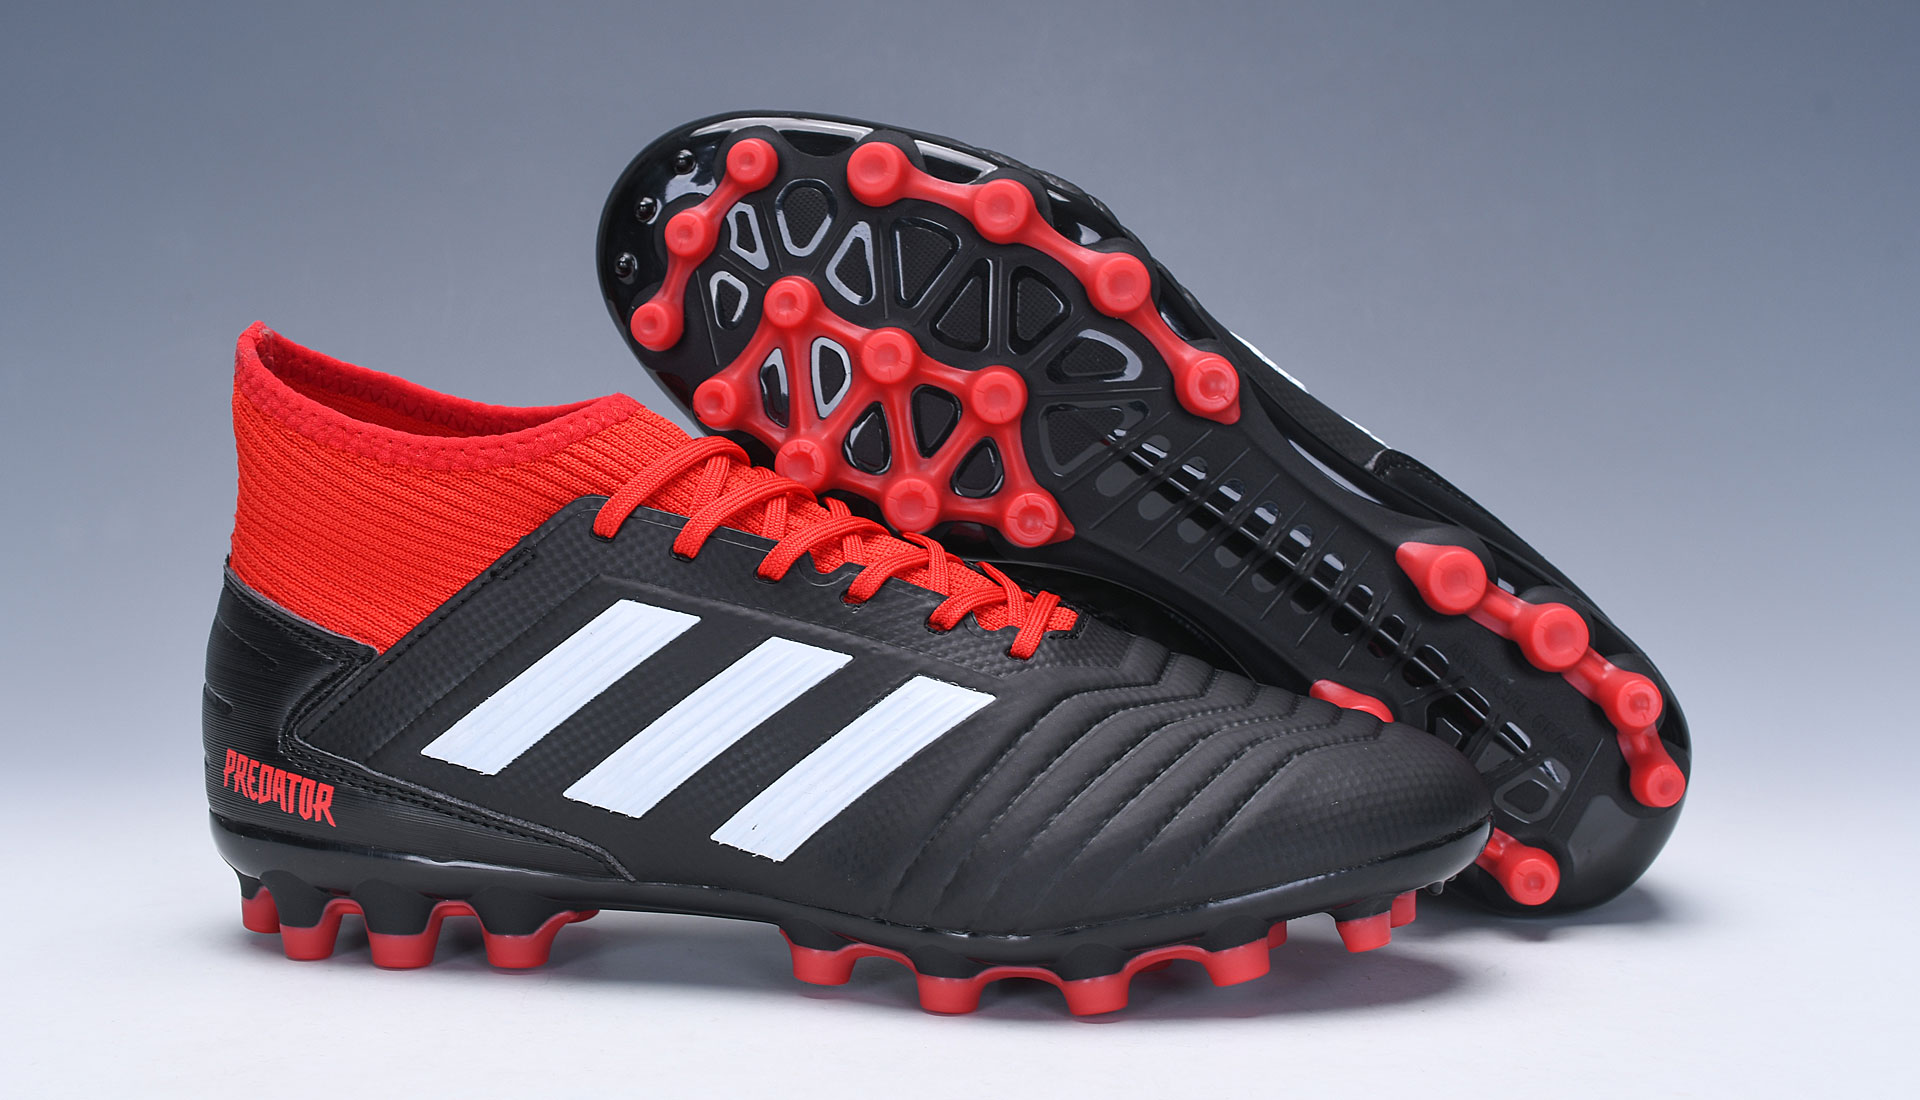 Adidas PREDATOR 18.3 AG Artificial Grass 'Black Red' BB7747 - Premium Soccer Cleats for Precision and Style